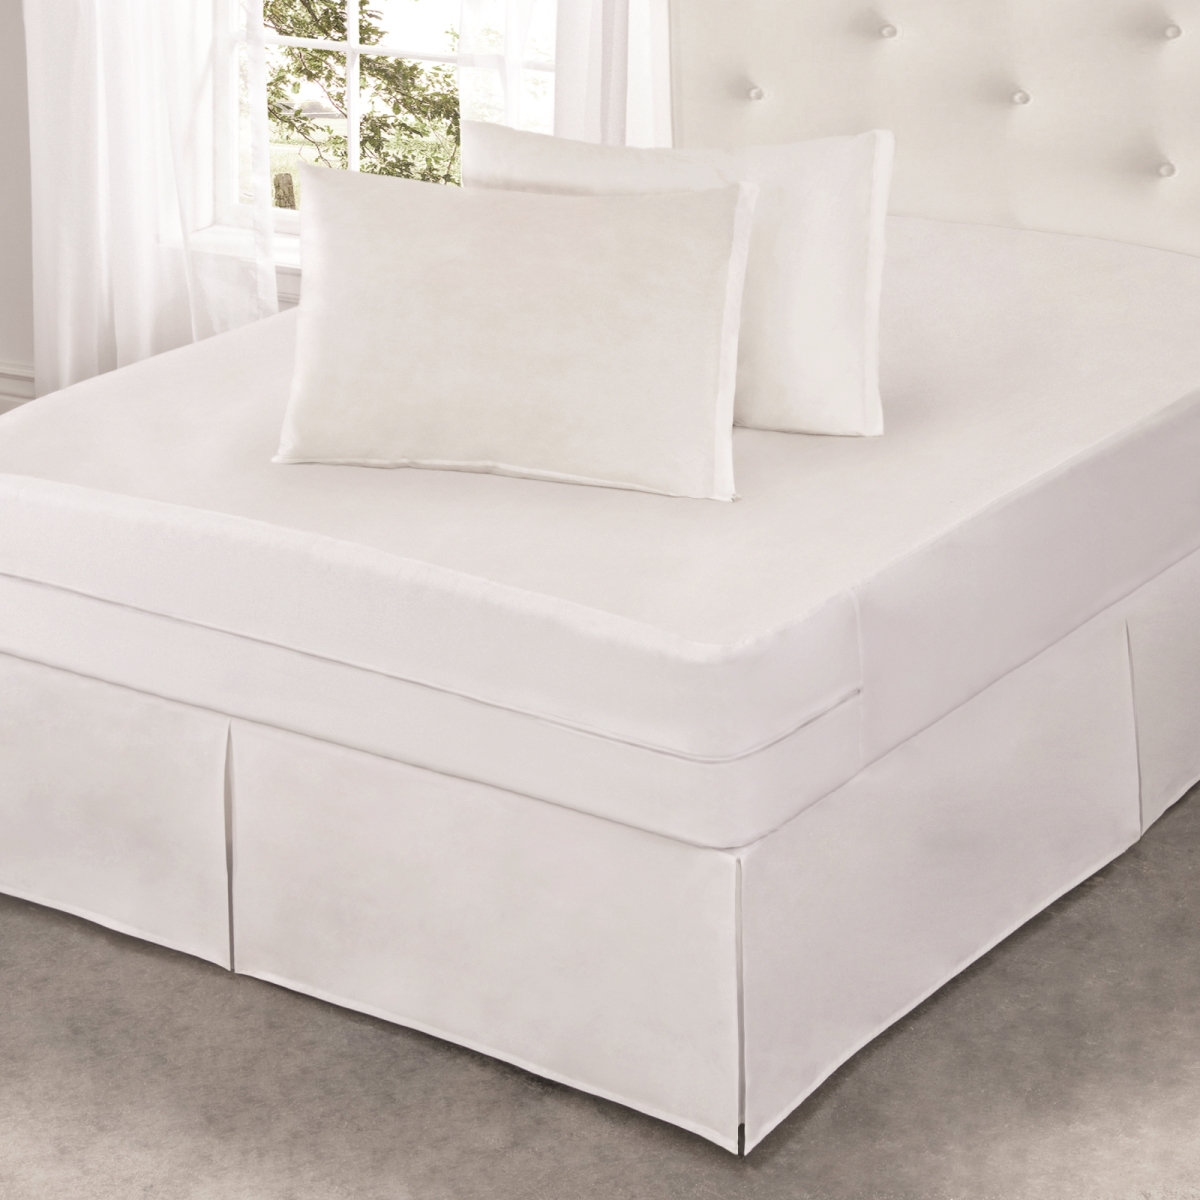 All172xxwhit03 Cool Bamboo Mattress Protector With Bed Bug Blocker, White - Queen Size